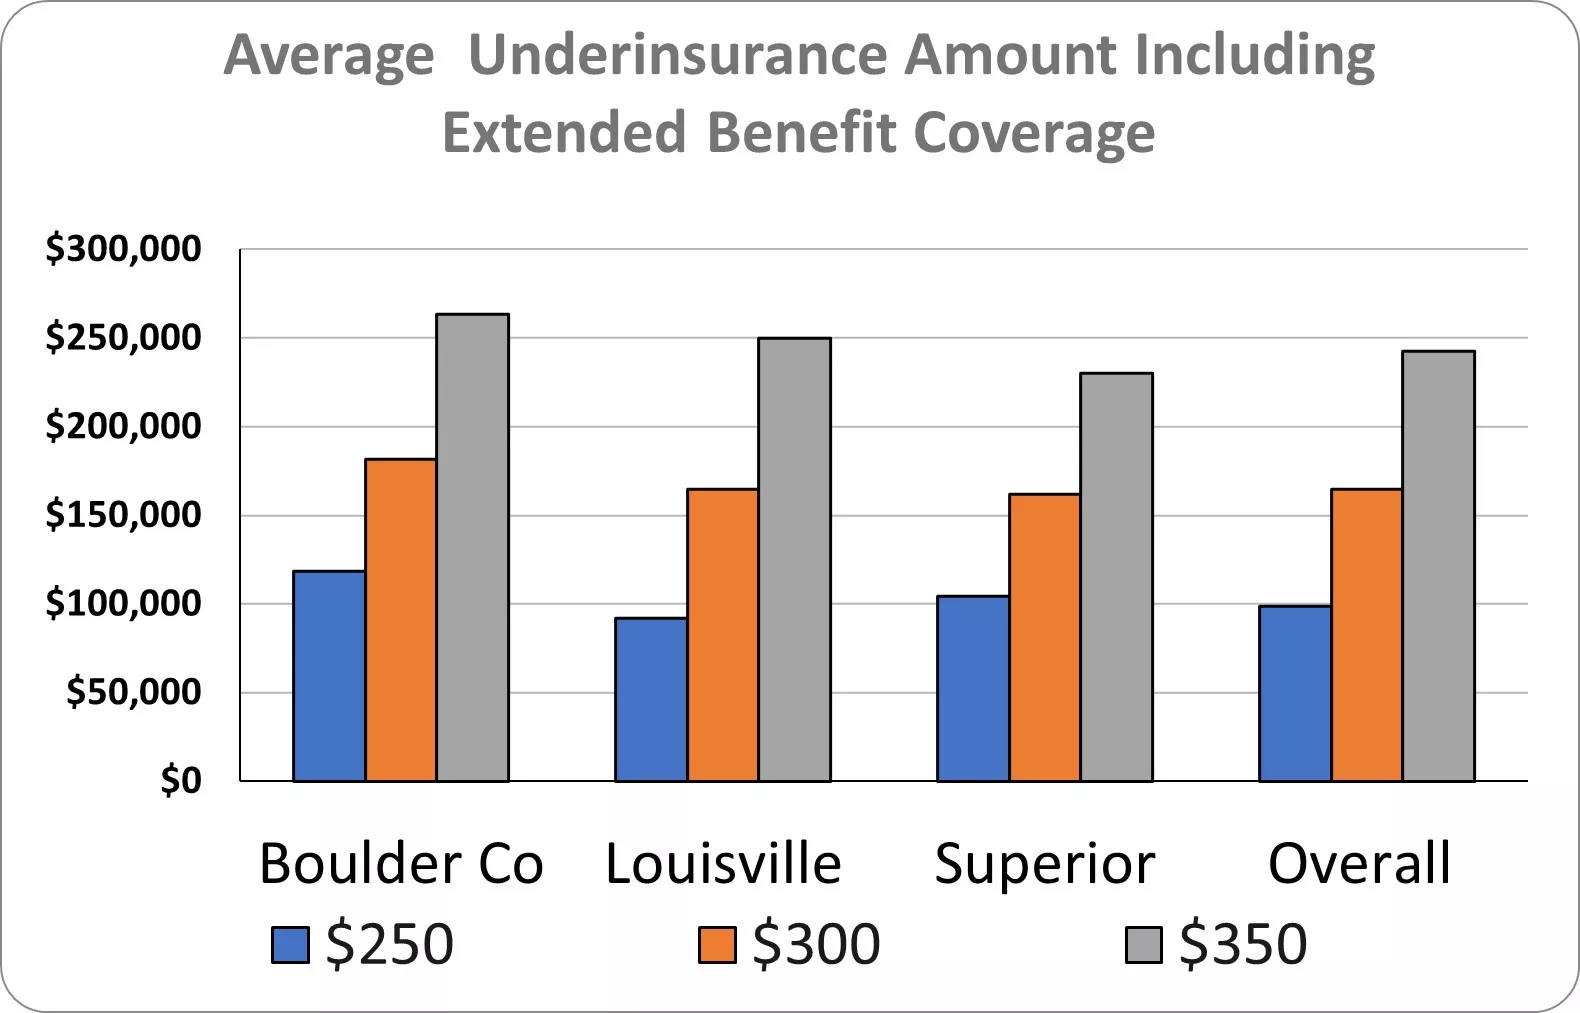 Average Amount of Underinsurance per Policy - At $250 per square foot rebuild costs, average underinsurance per policy is $98,967; at $300 per square foot rebuild costs, average underinsurance per policy is $164,855; at $350 per square foot rebuild costs, average underinsurance per policy is $242,670.